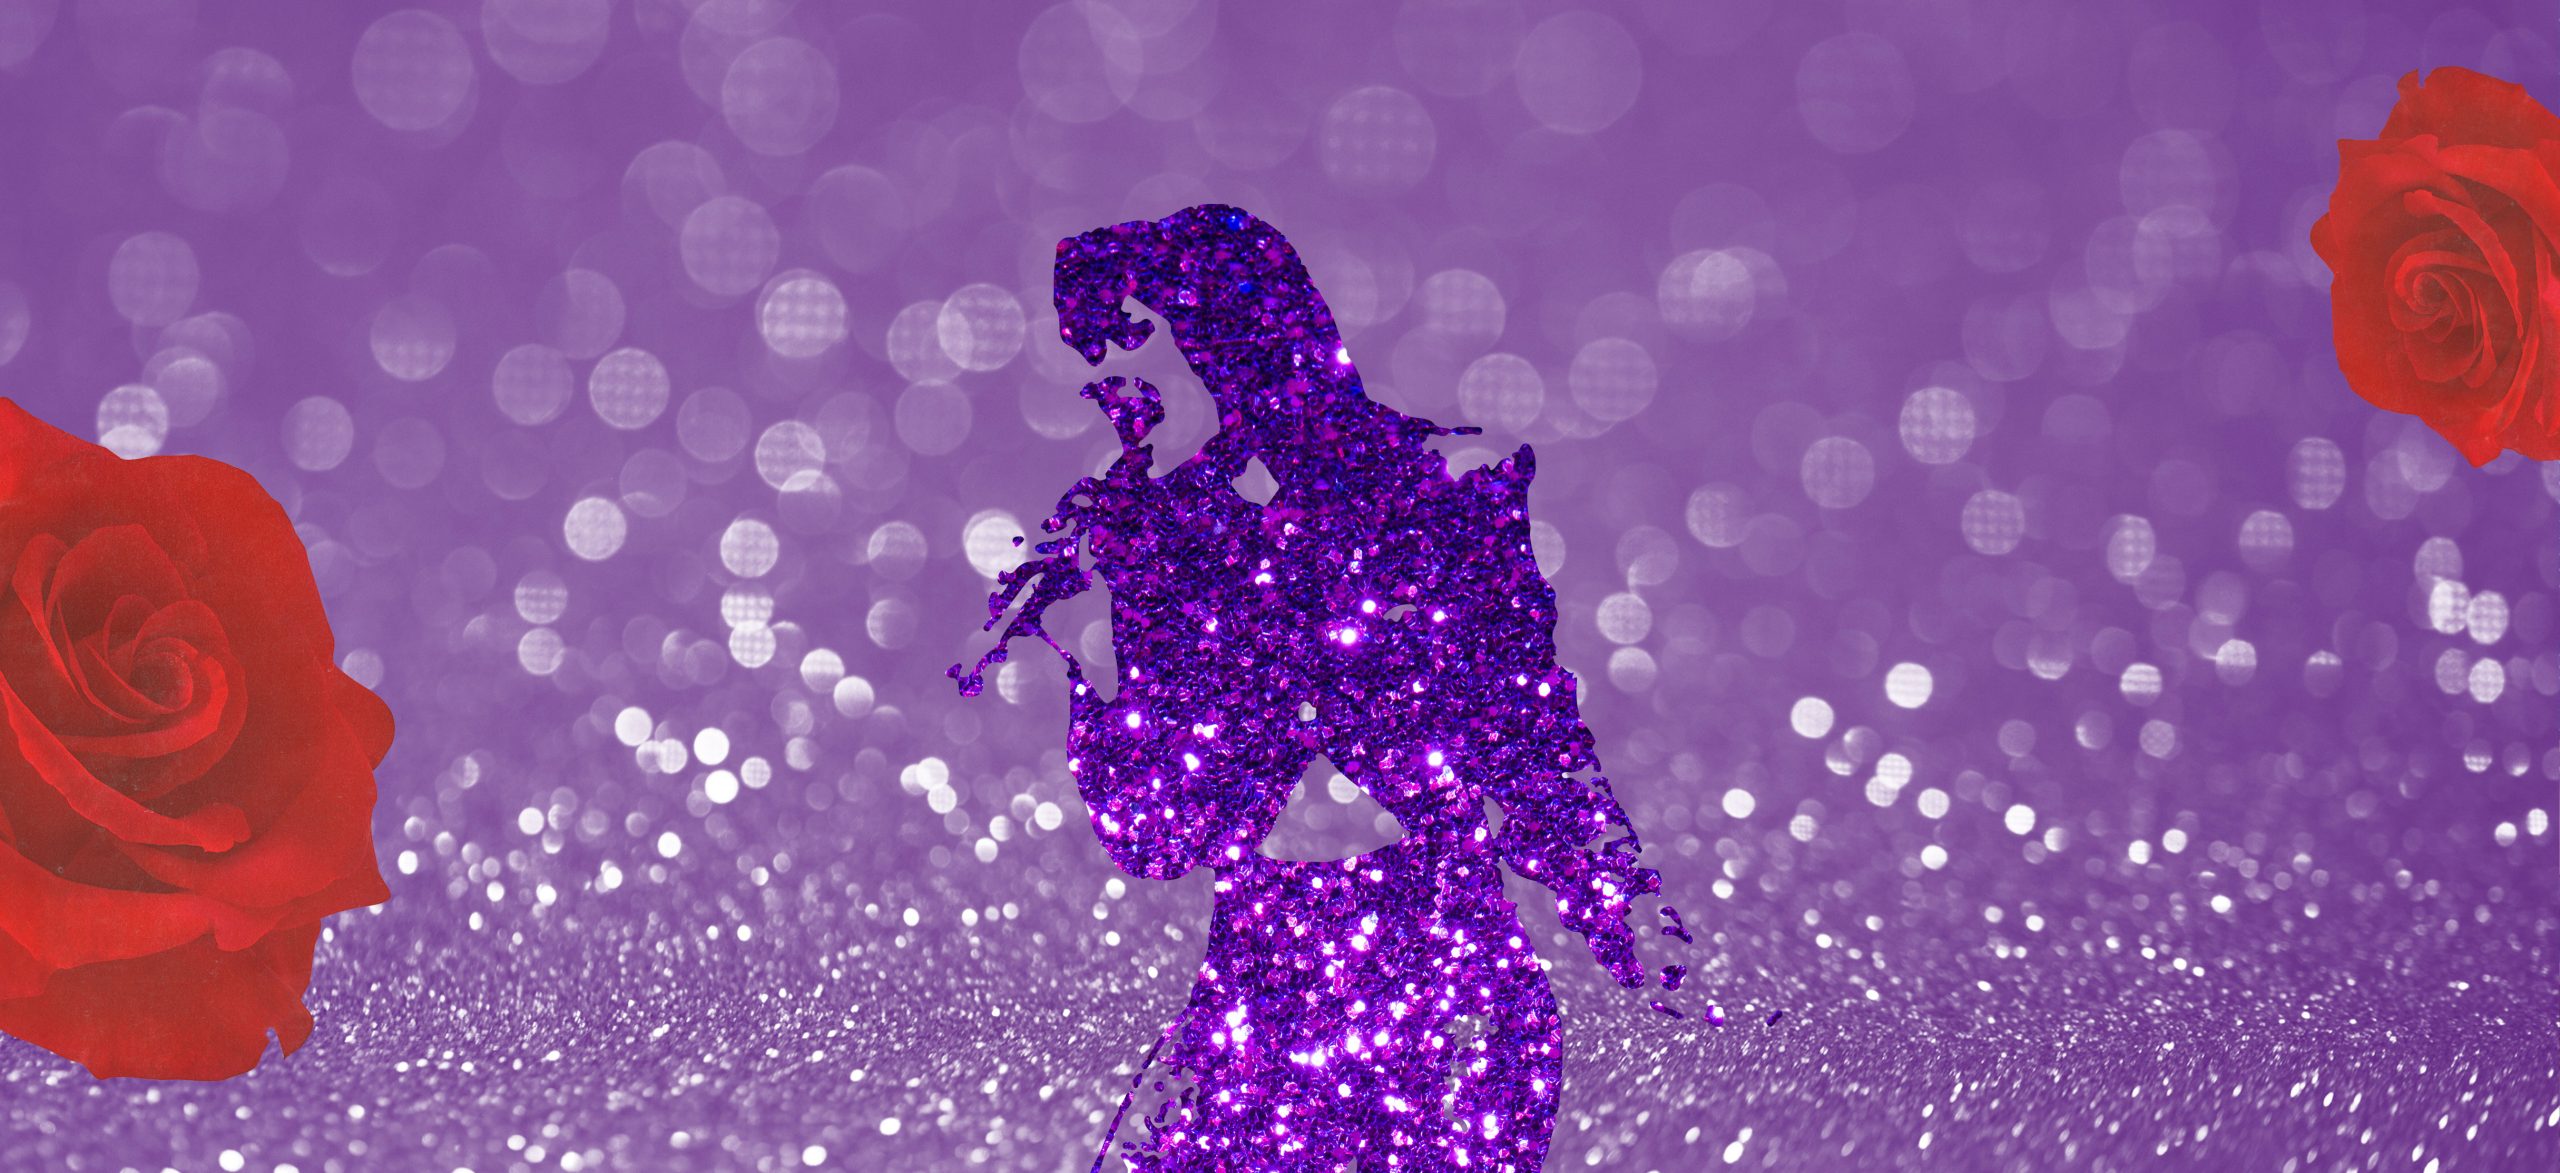 Background image for SELENA DAY - SELENA'S 52ND BIRTHDAY